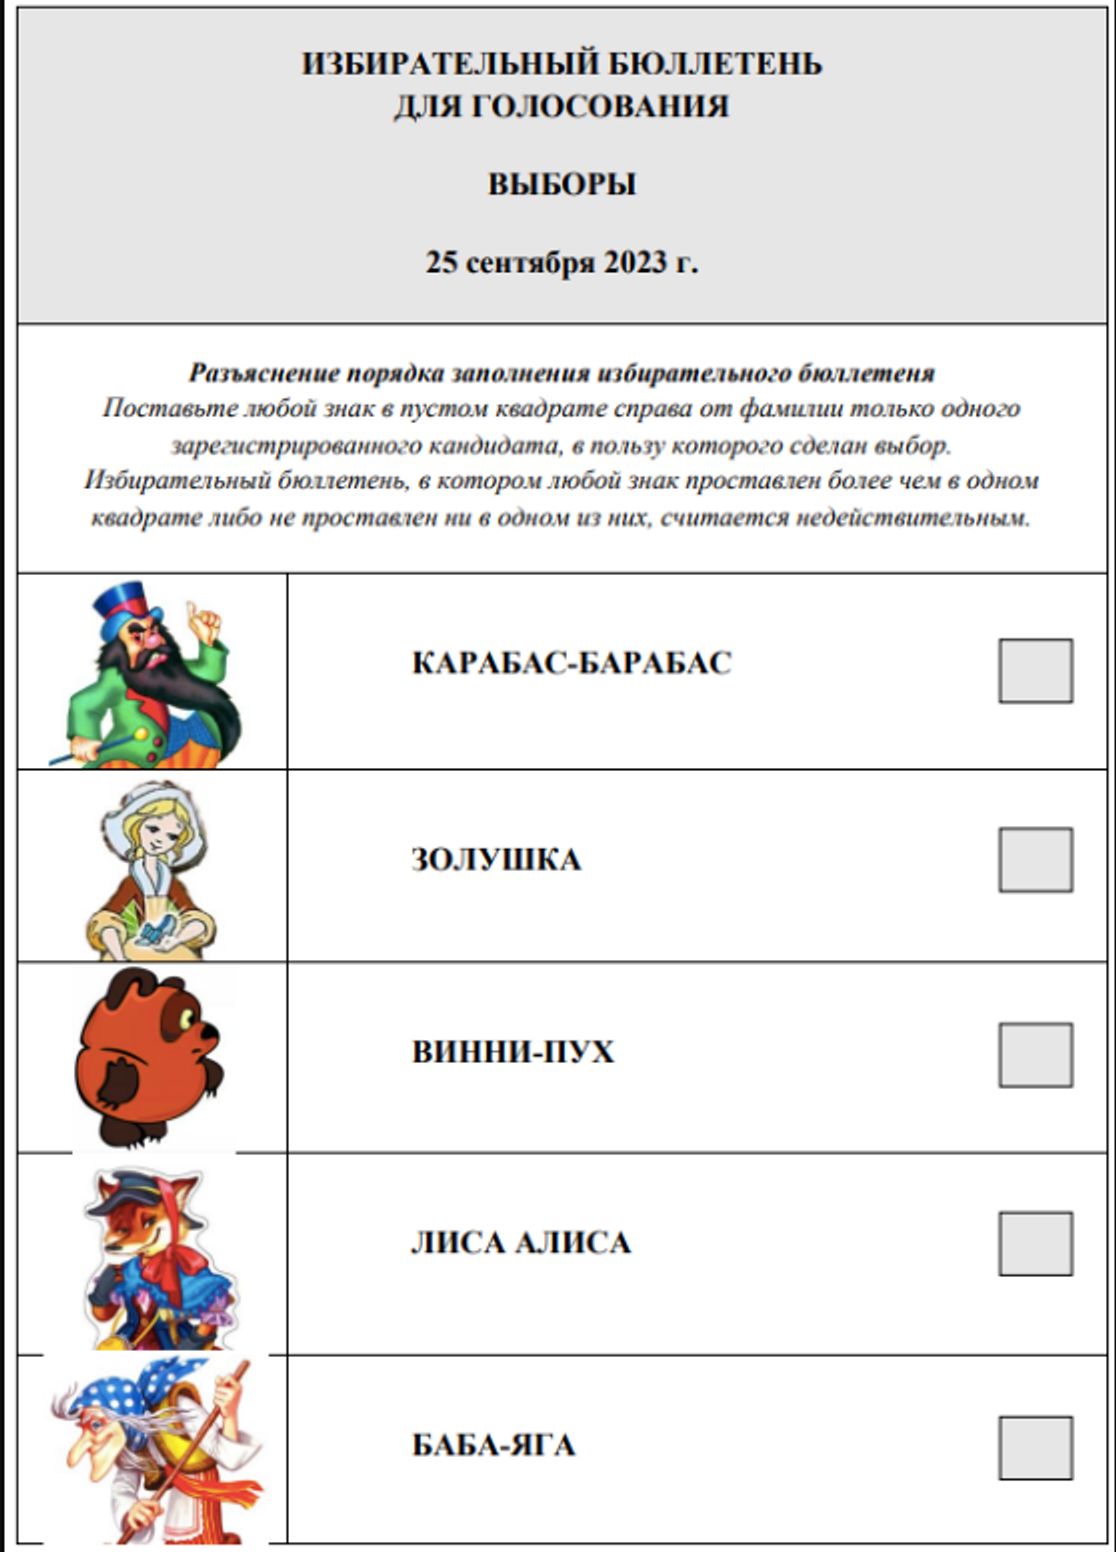 1695040541 735 Primary schoolchildren in Russia will be asked to choose the Primary schoolchildren in Russia will be asked to choose the president of a fairy-tale country. Candidates: Karabas-Barabas, Baba Yaga and Lisa Alice